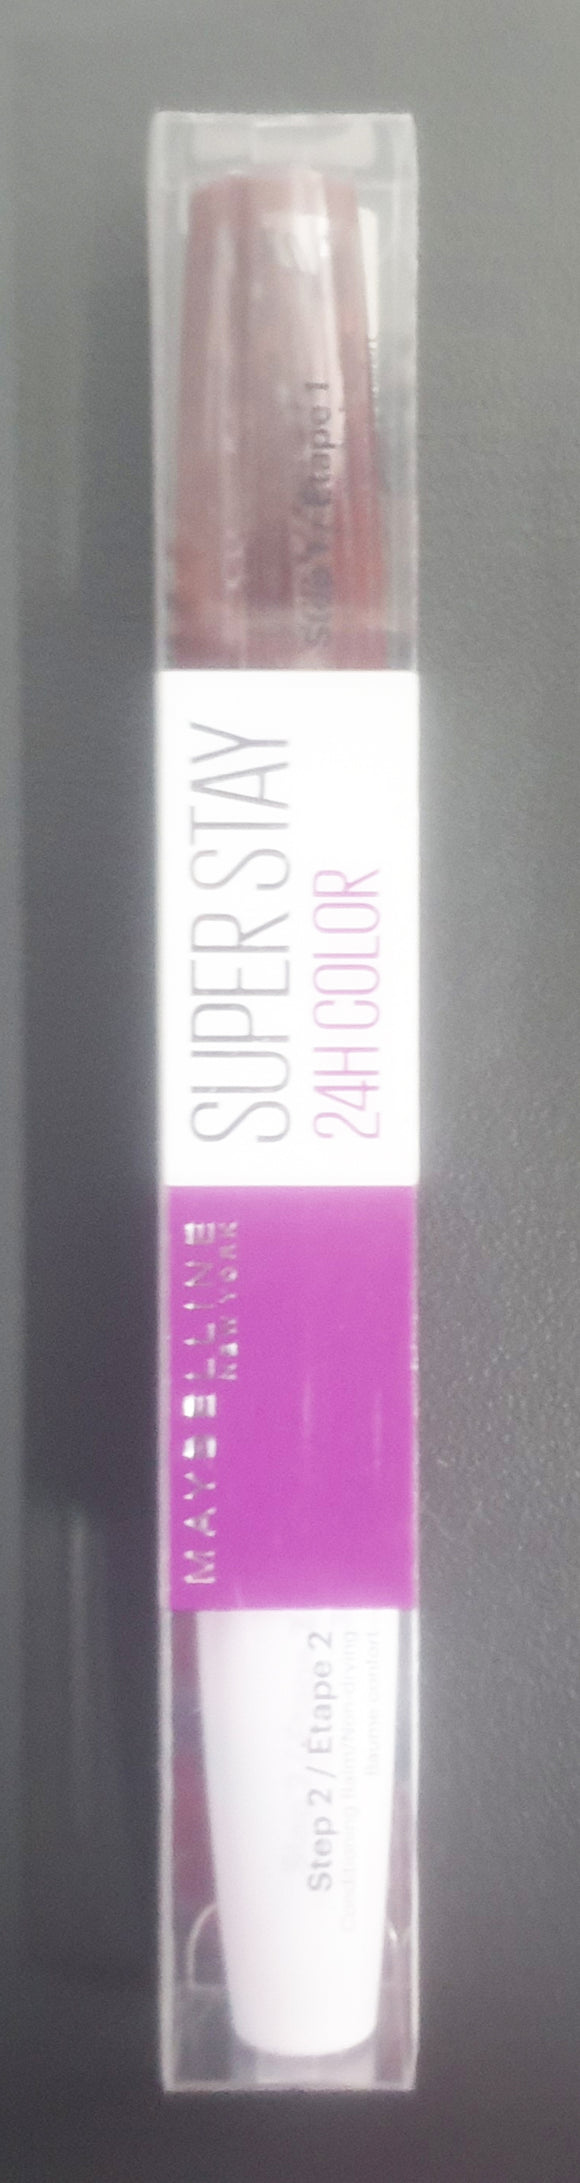 Maybelline Superstay 24HR Dual Ended Lipstick 840 Merlot *Boxed*